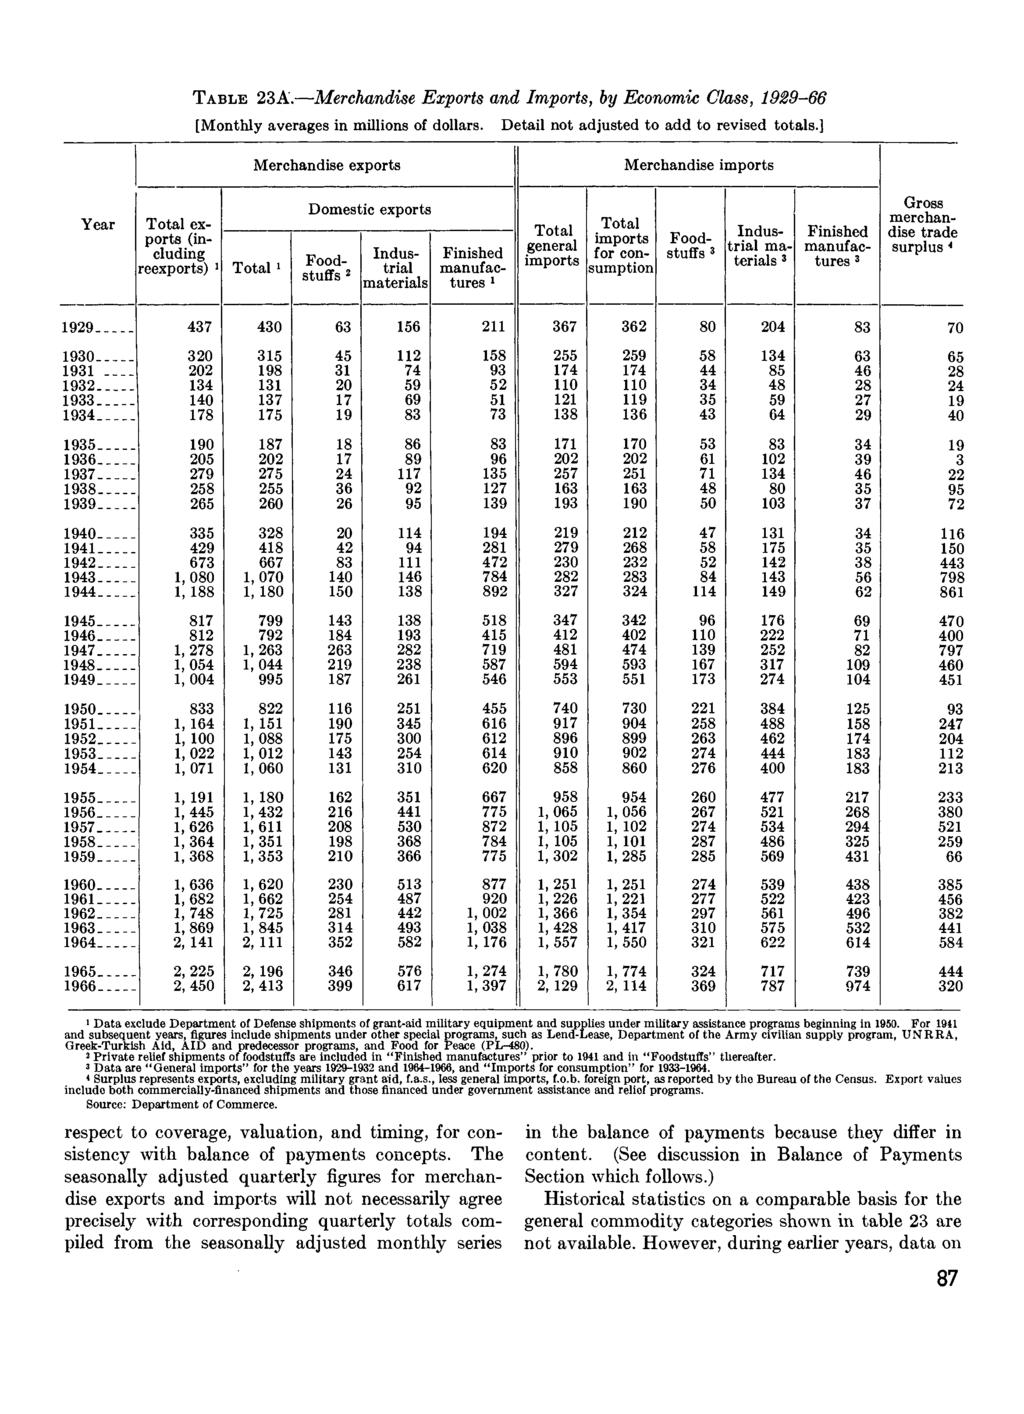 TABLE 23A. Merchandise Exports and Imports, by Economic Class, 1929-66 [Monthly averages in millions of dollars. Detail not adjusted to add to revised totals.